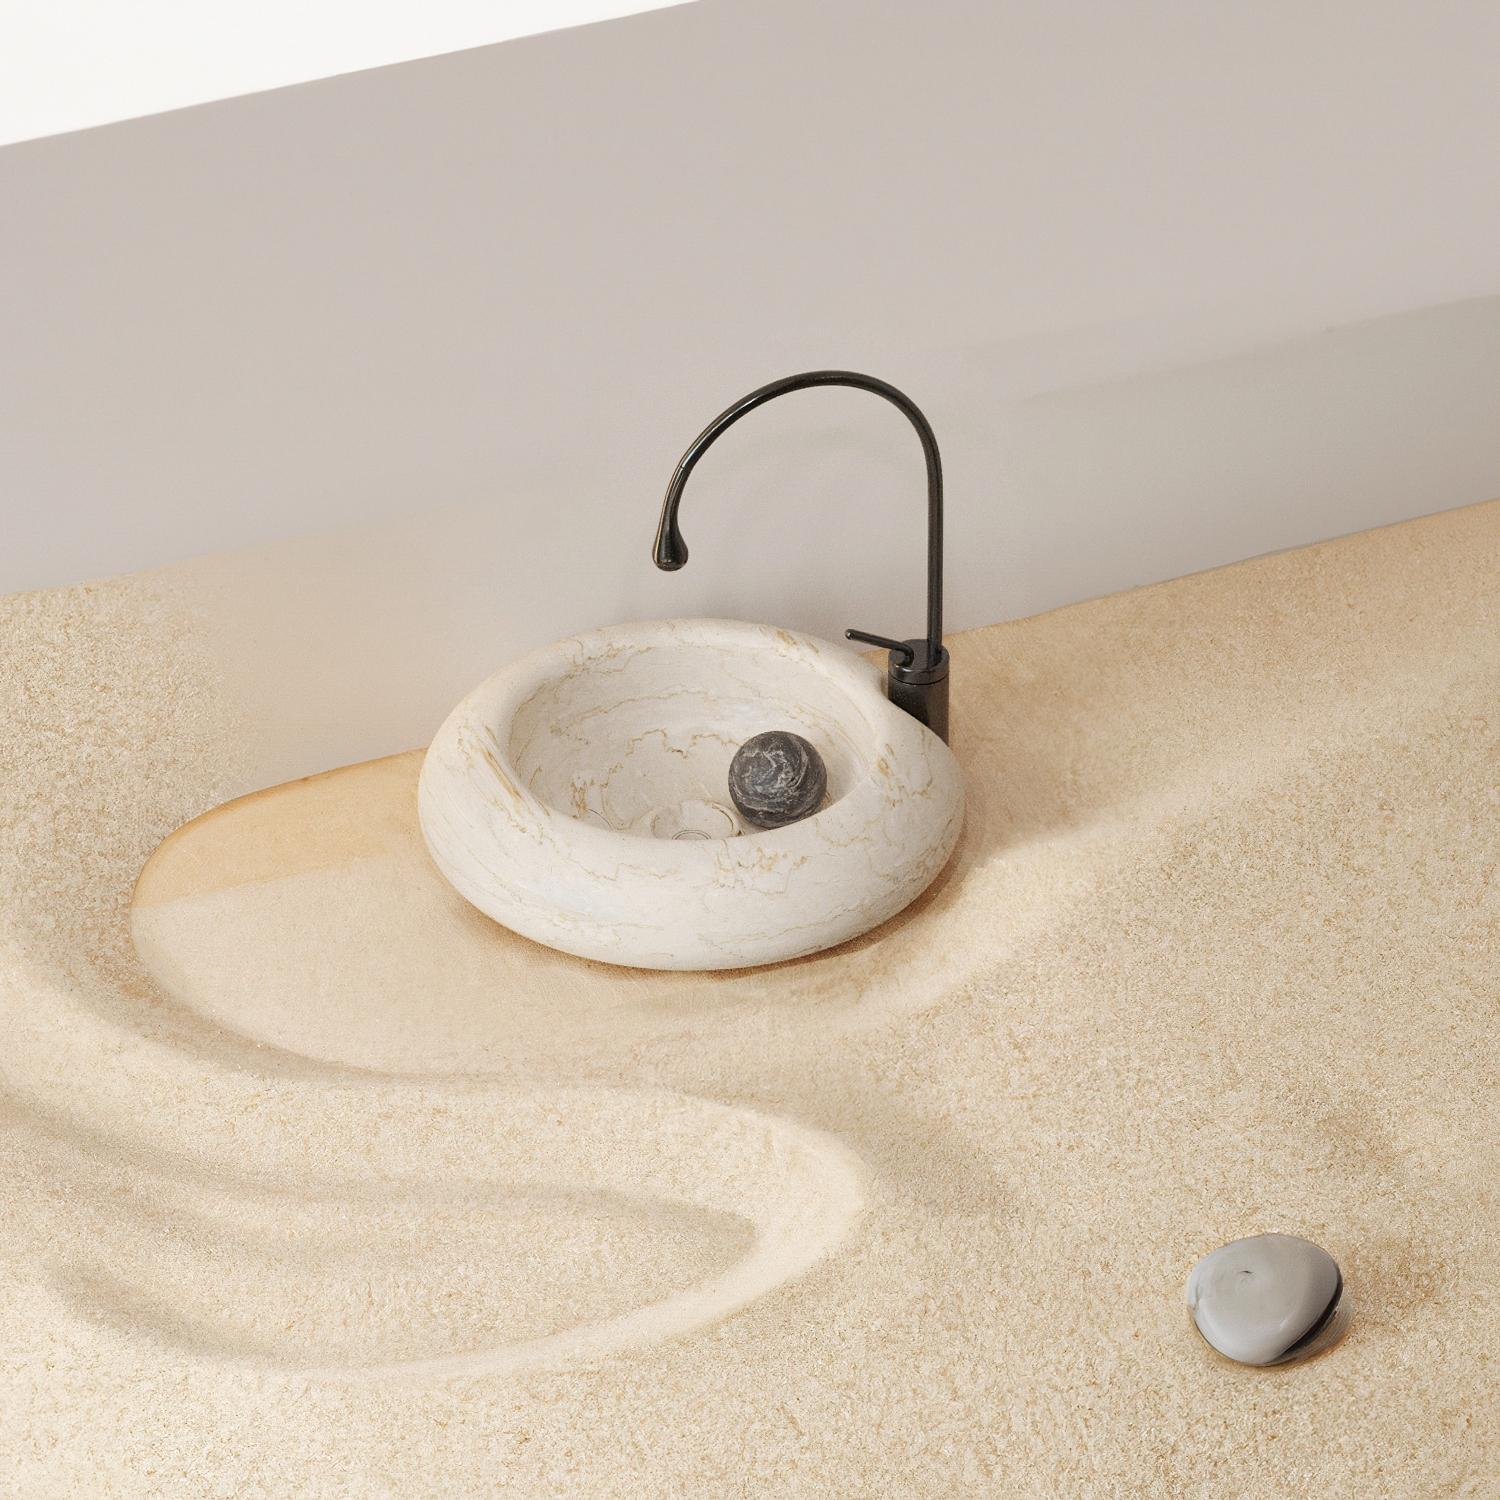 Kyknos Roll Ball Sink by Marmi Serafini
Special Edition
Materials: Kyknos marble, P.S.Laurant marble.
Dimensions: D 54.5 x H 14 cm
Other marbles available.
Tap not included.


Marmi Serafini is located in a small city named Chiampo,